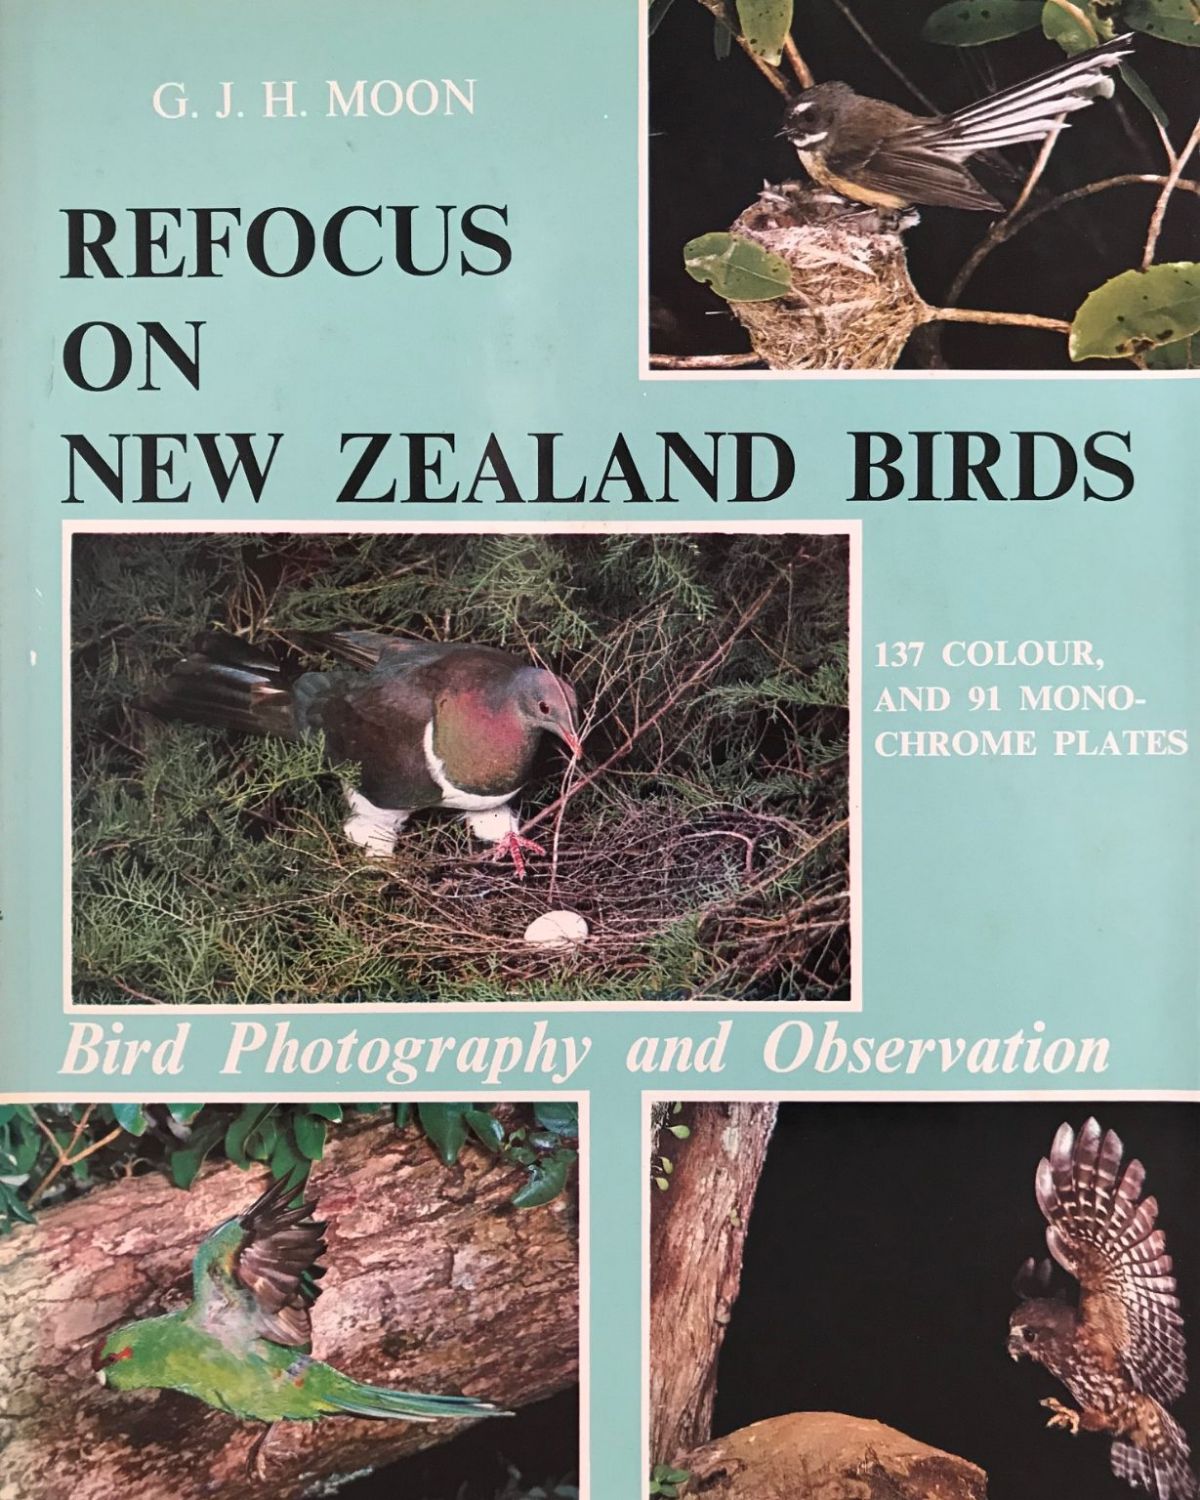 REFOCUS ON NEW ZEALAND BIRDS: Bird Photography and Observation